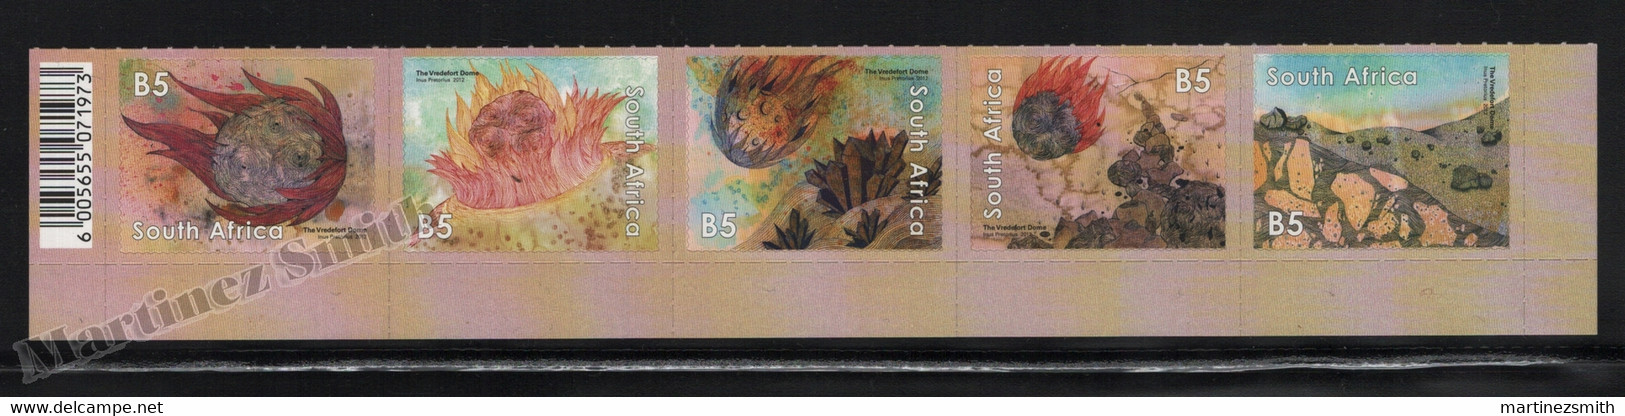 Afrique Du Sud - South Africa 2012 Yvert 1690-94, The Vredefort Dome - Adhesive Full Strip - MNH - Neufs